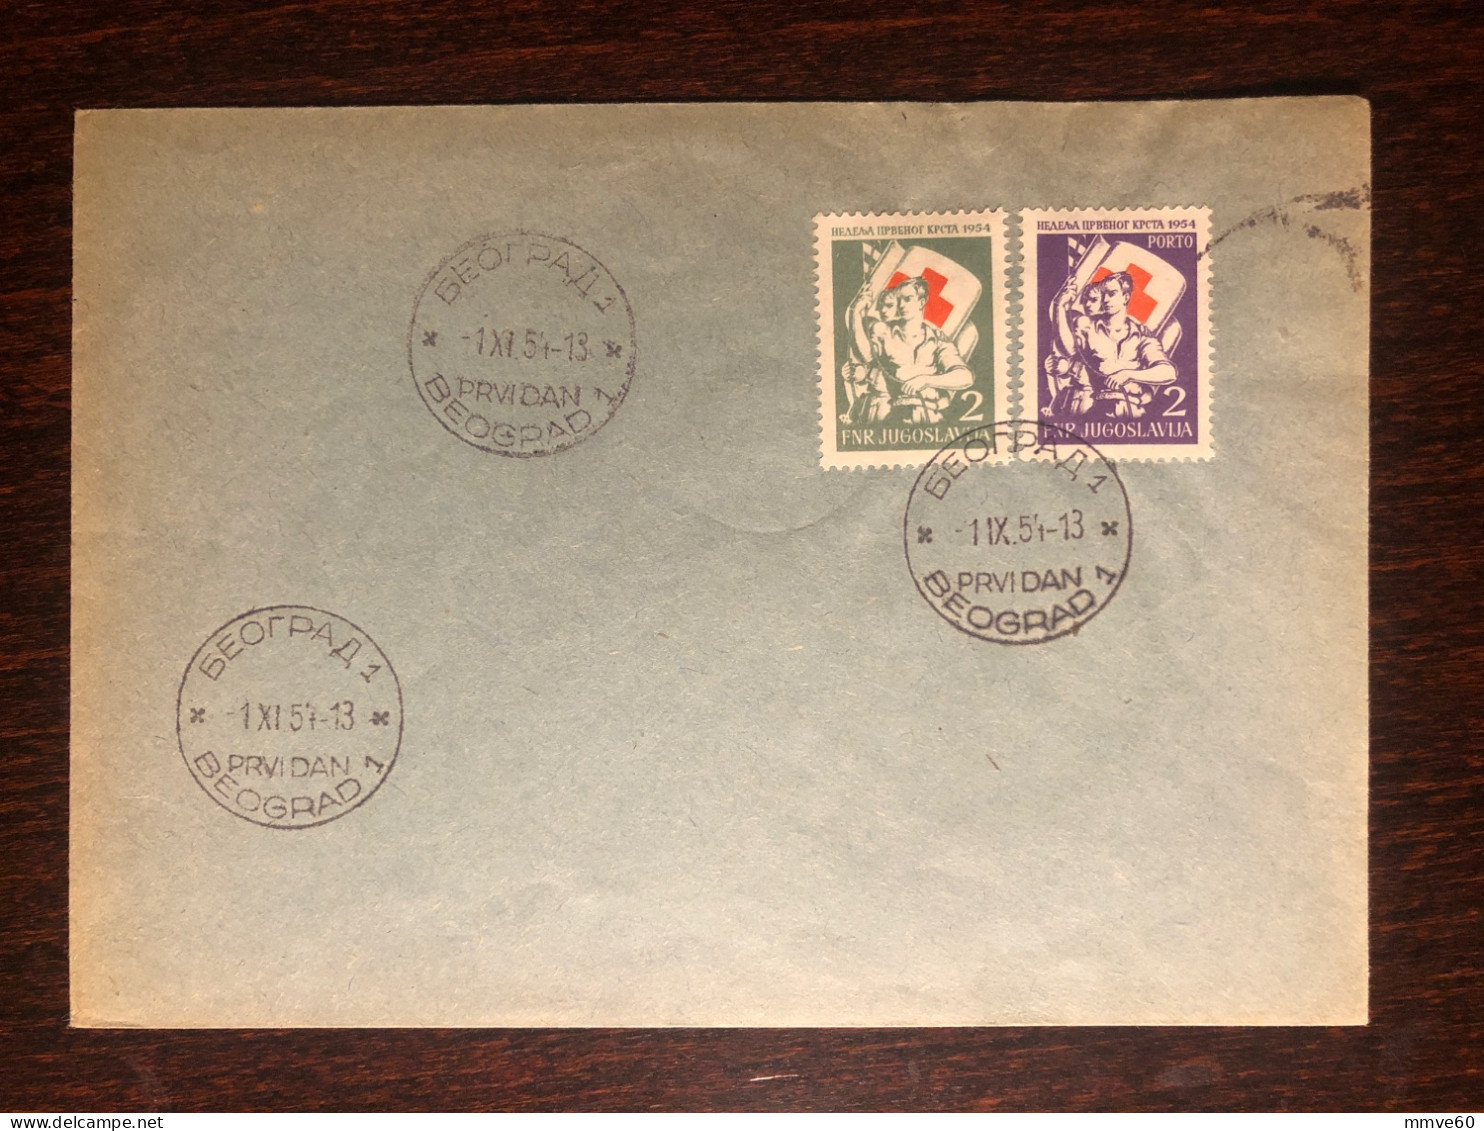 YUGOSLAVIA FDC COVER 1954 YEAR RED CROSS HEALTH MEDICINE STAMPS - FDC